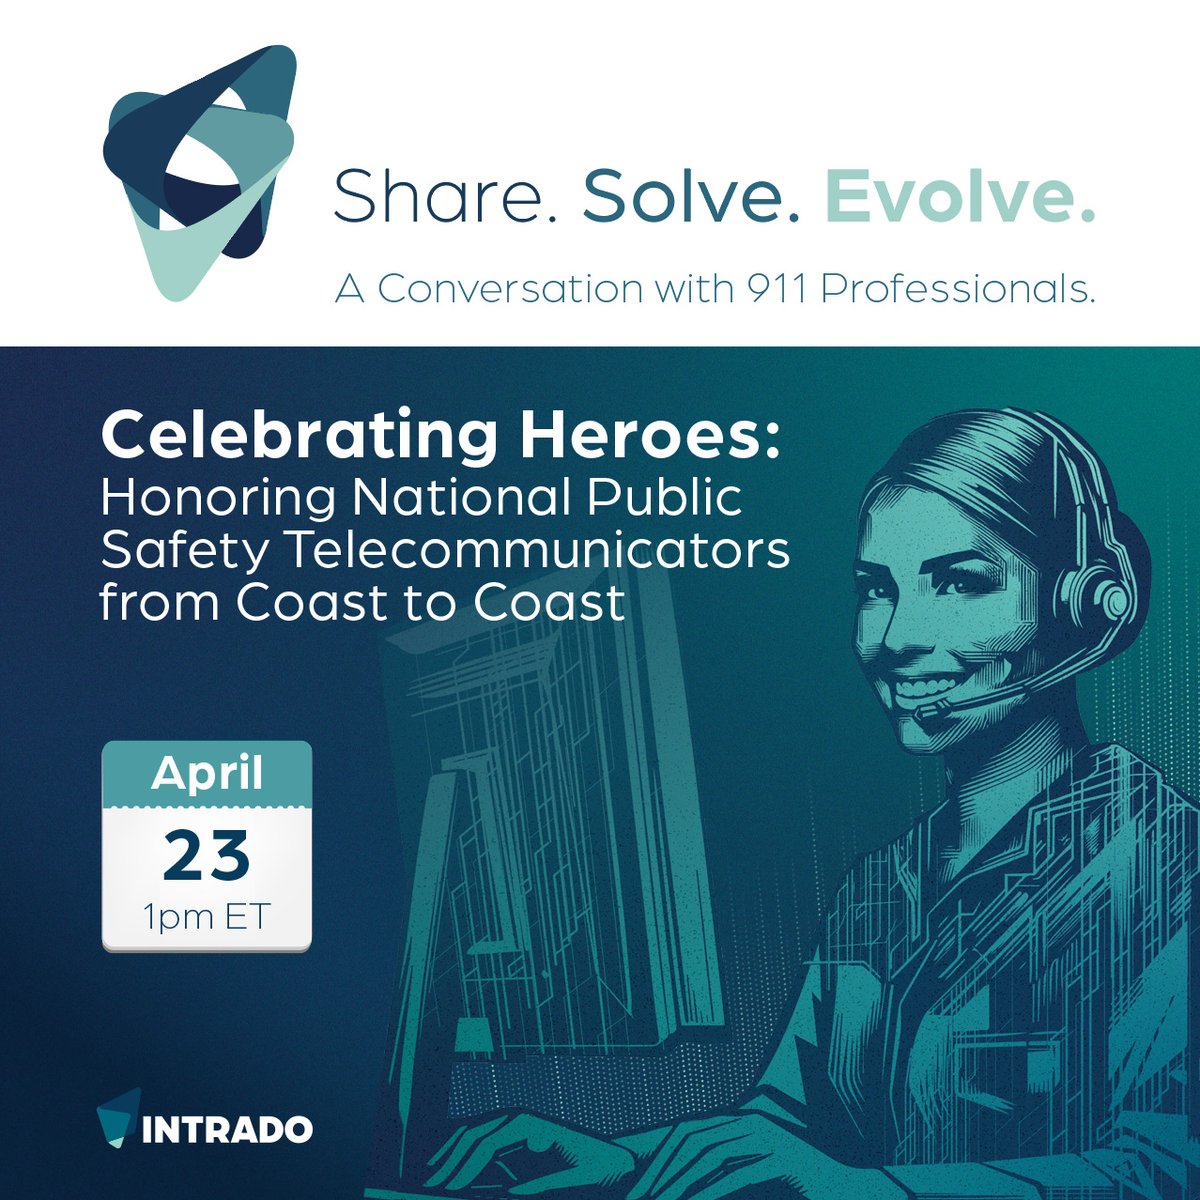 Please join us on April 23 at 1PM EST to learn how PSAP/ECCs around the country celebrated National Public Safety Telecommunicators Week. Our panel of industry heroes will shine a spotlight on the unsung heroes behind the scenes: #PSAP and #ECC personnel. 
hubs.la/Q02sYlZm0